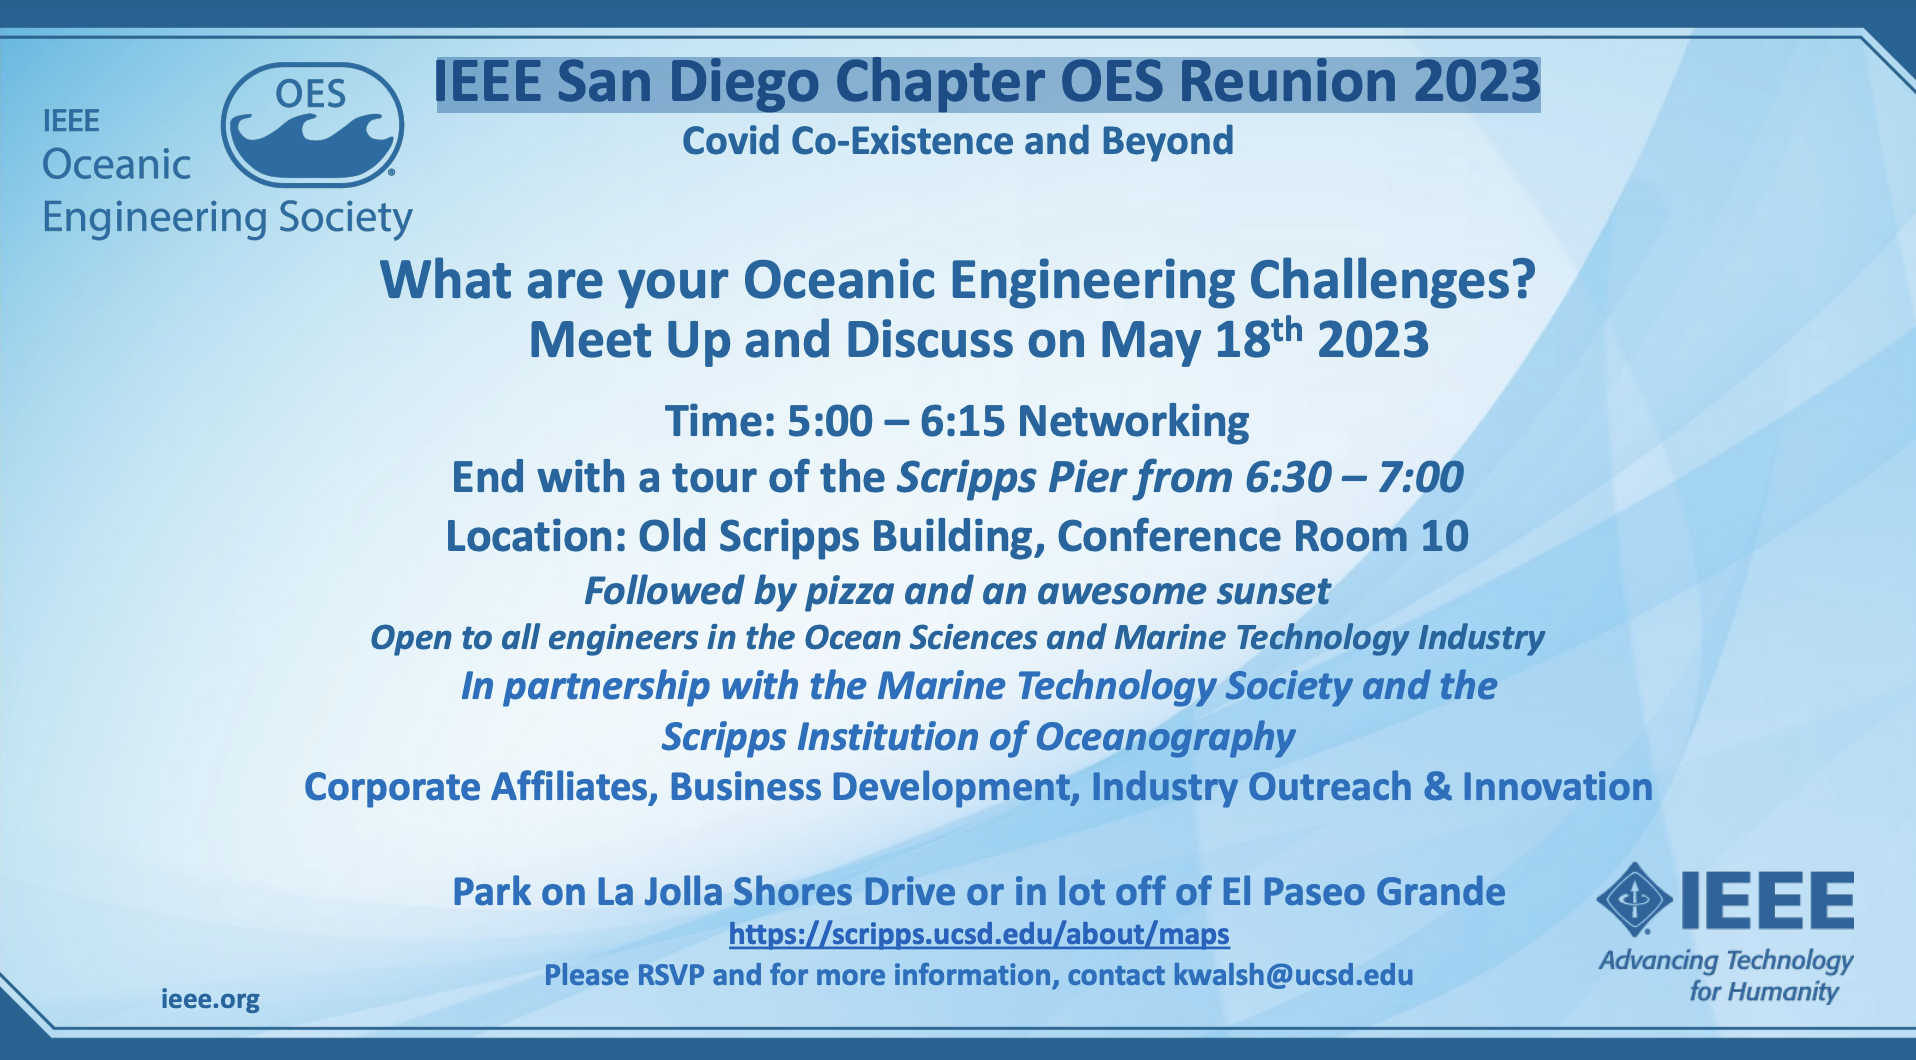 IEEE San Diego Chapter OES Reunion 2023 Scripps Institution of